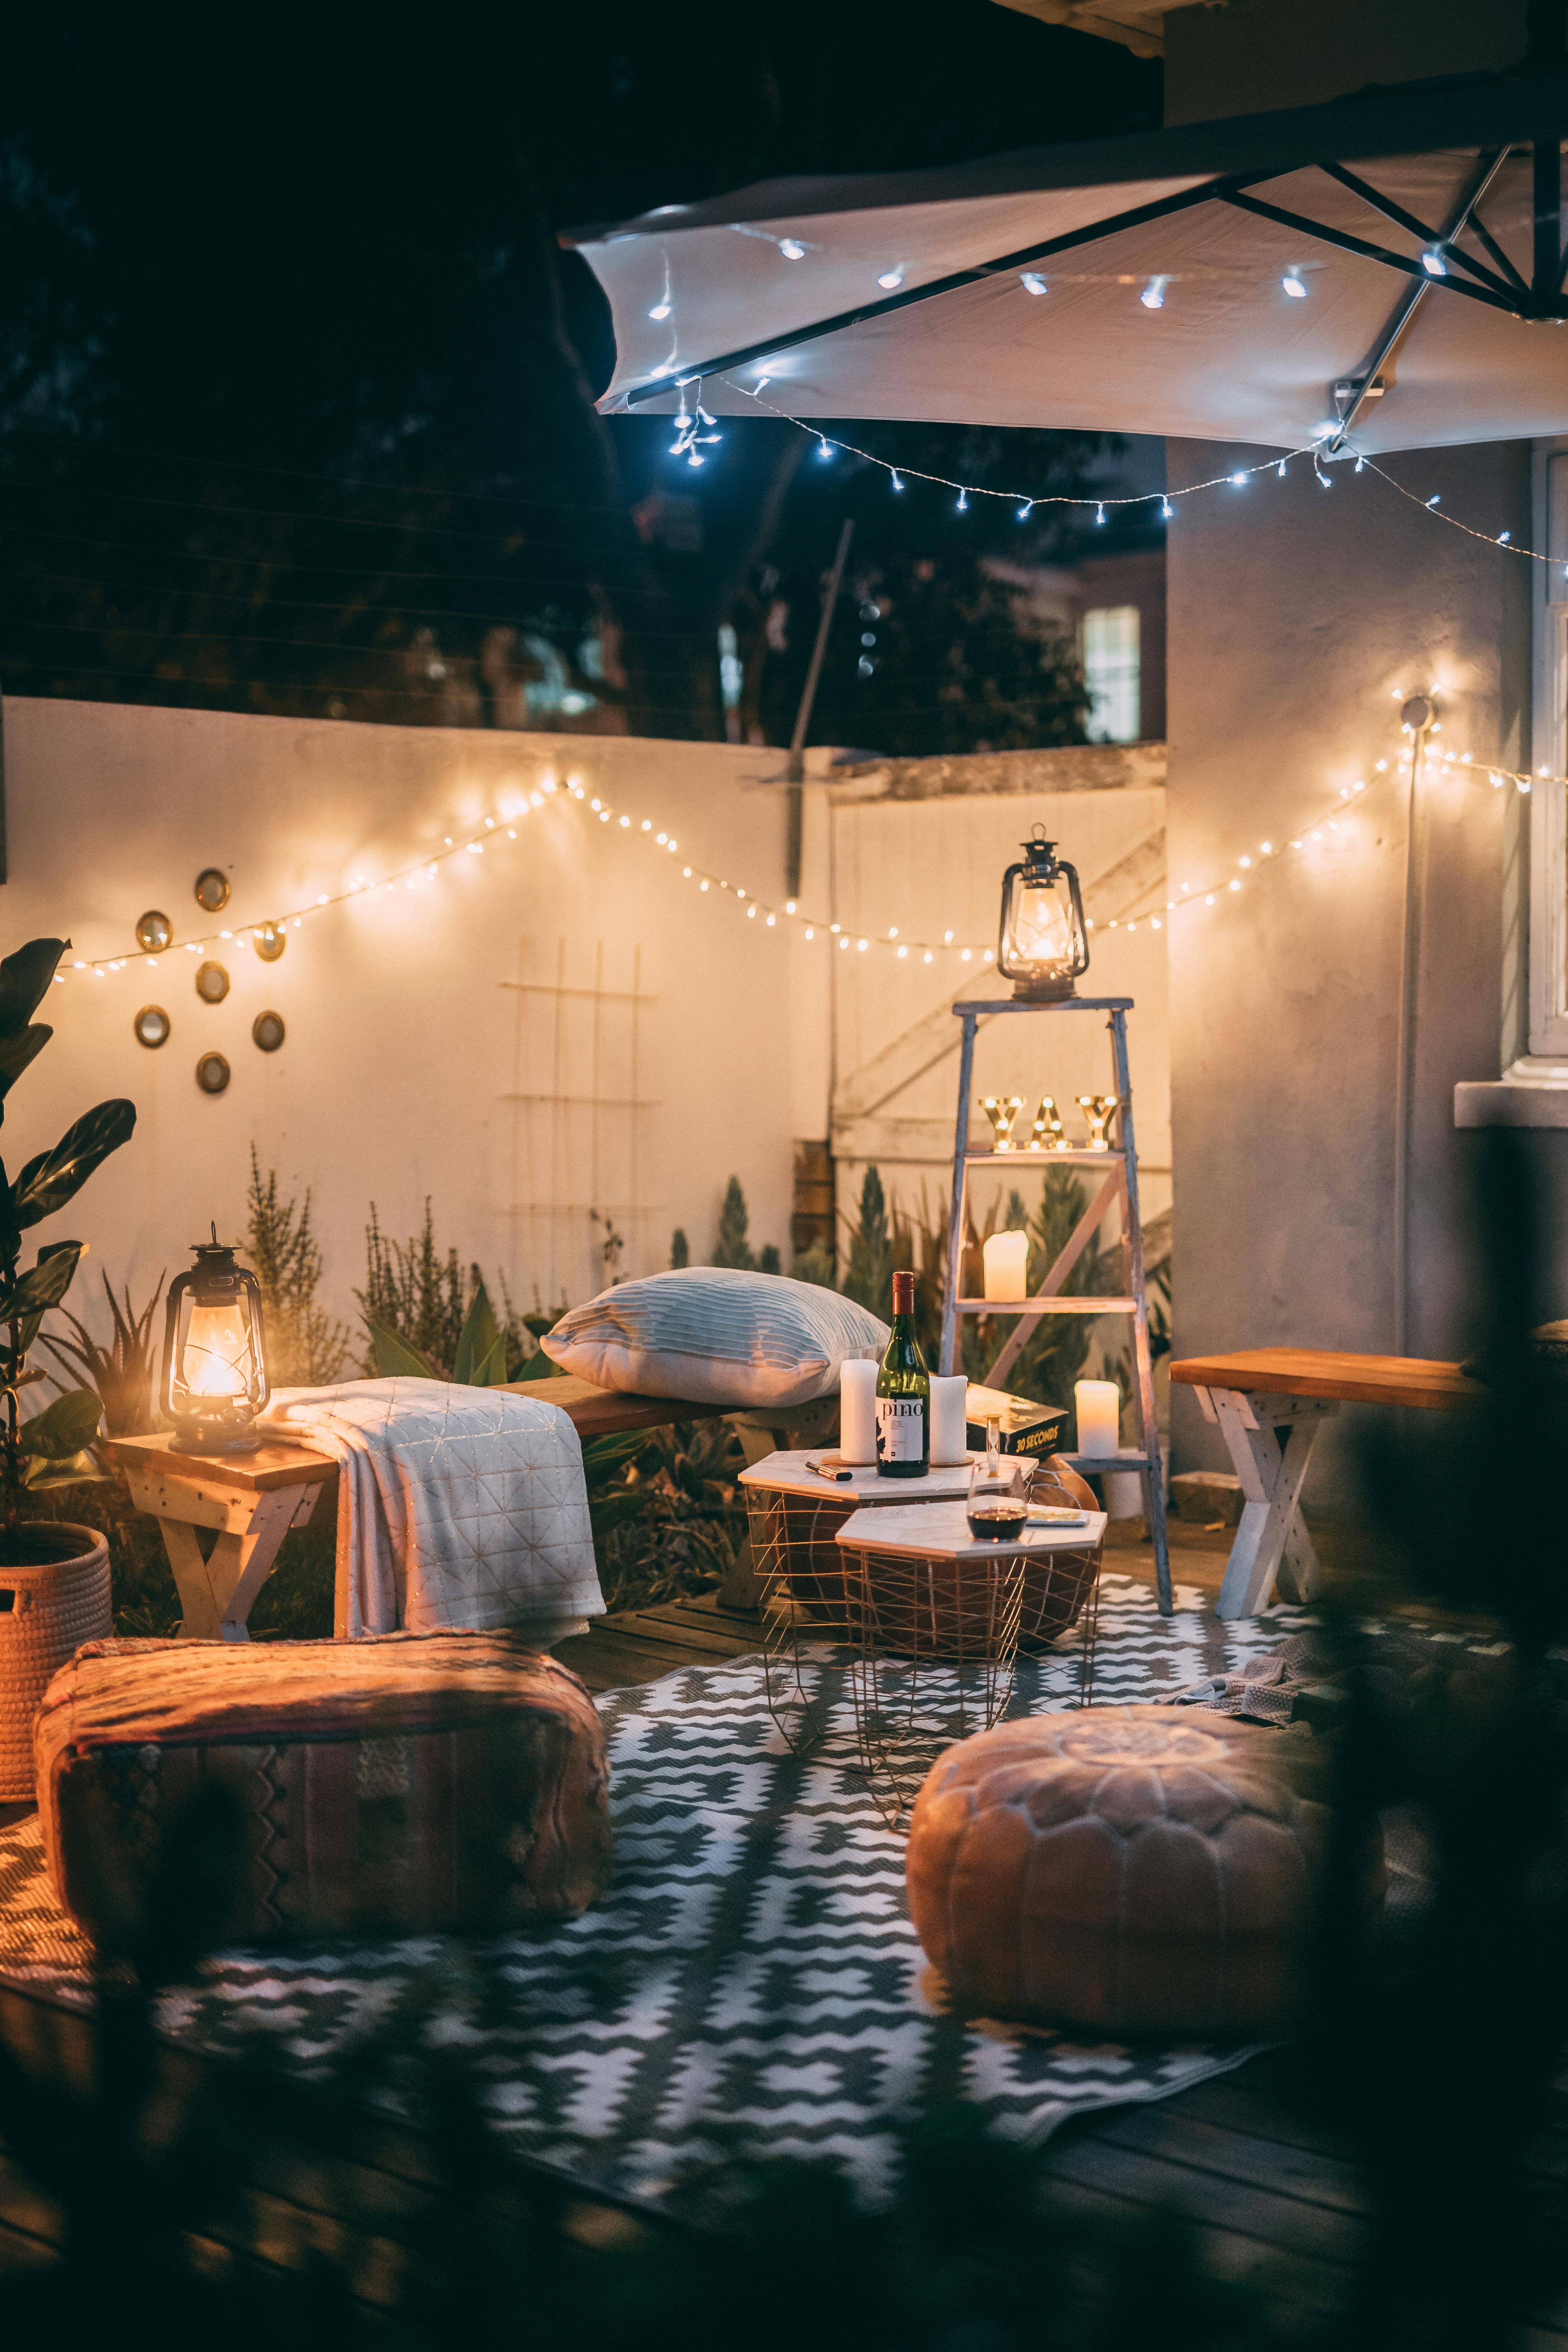 A cozy outdoor setting | Source: Pexels